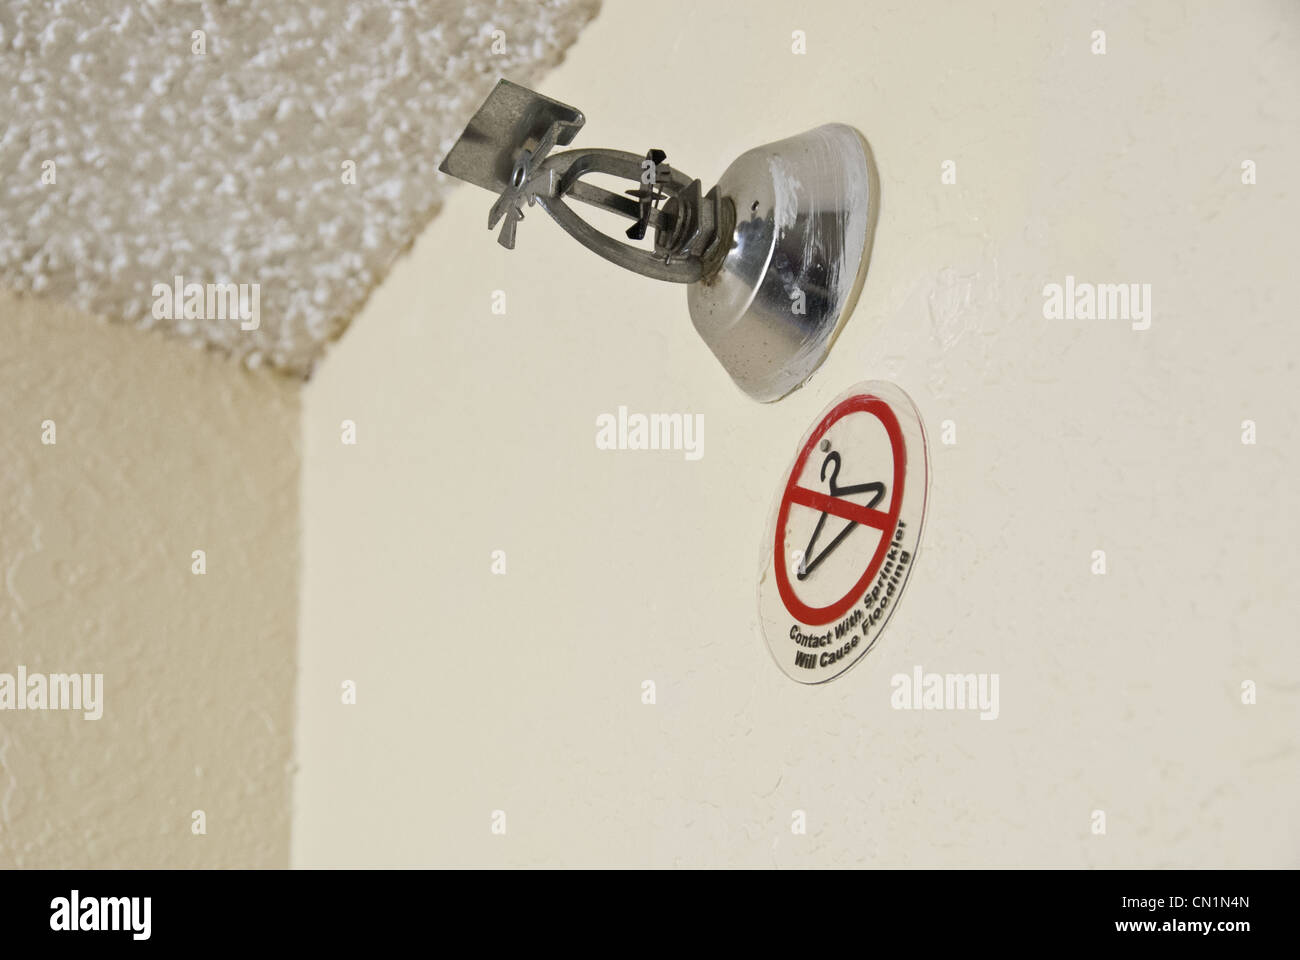 Fire prevention sprinkler and 'no clothes hangers' sign in hotel room, USA Stock Photo